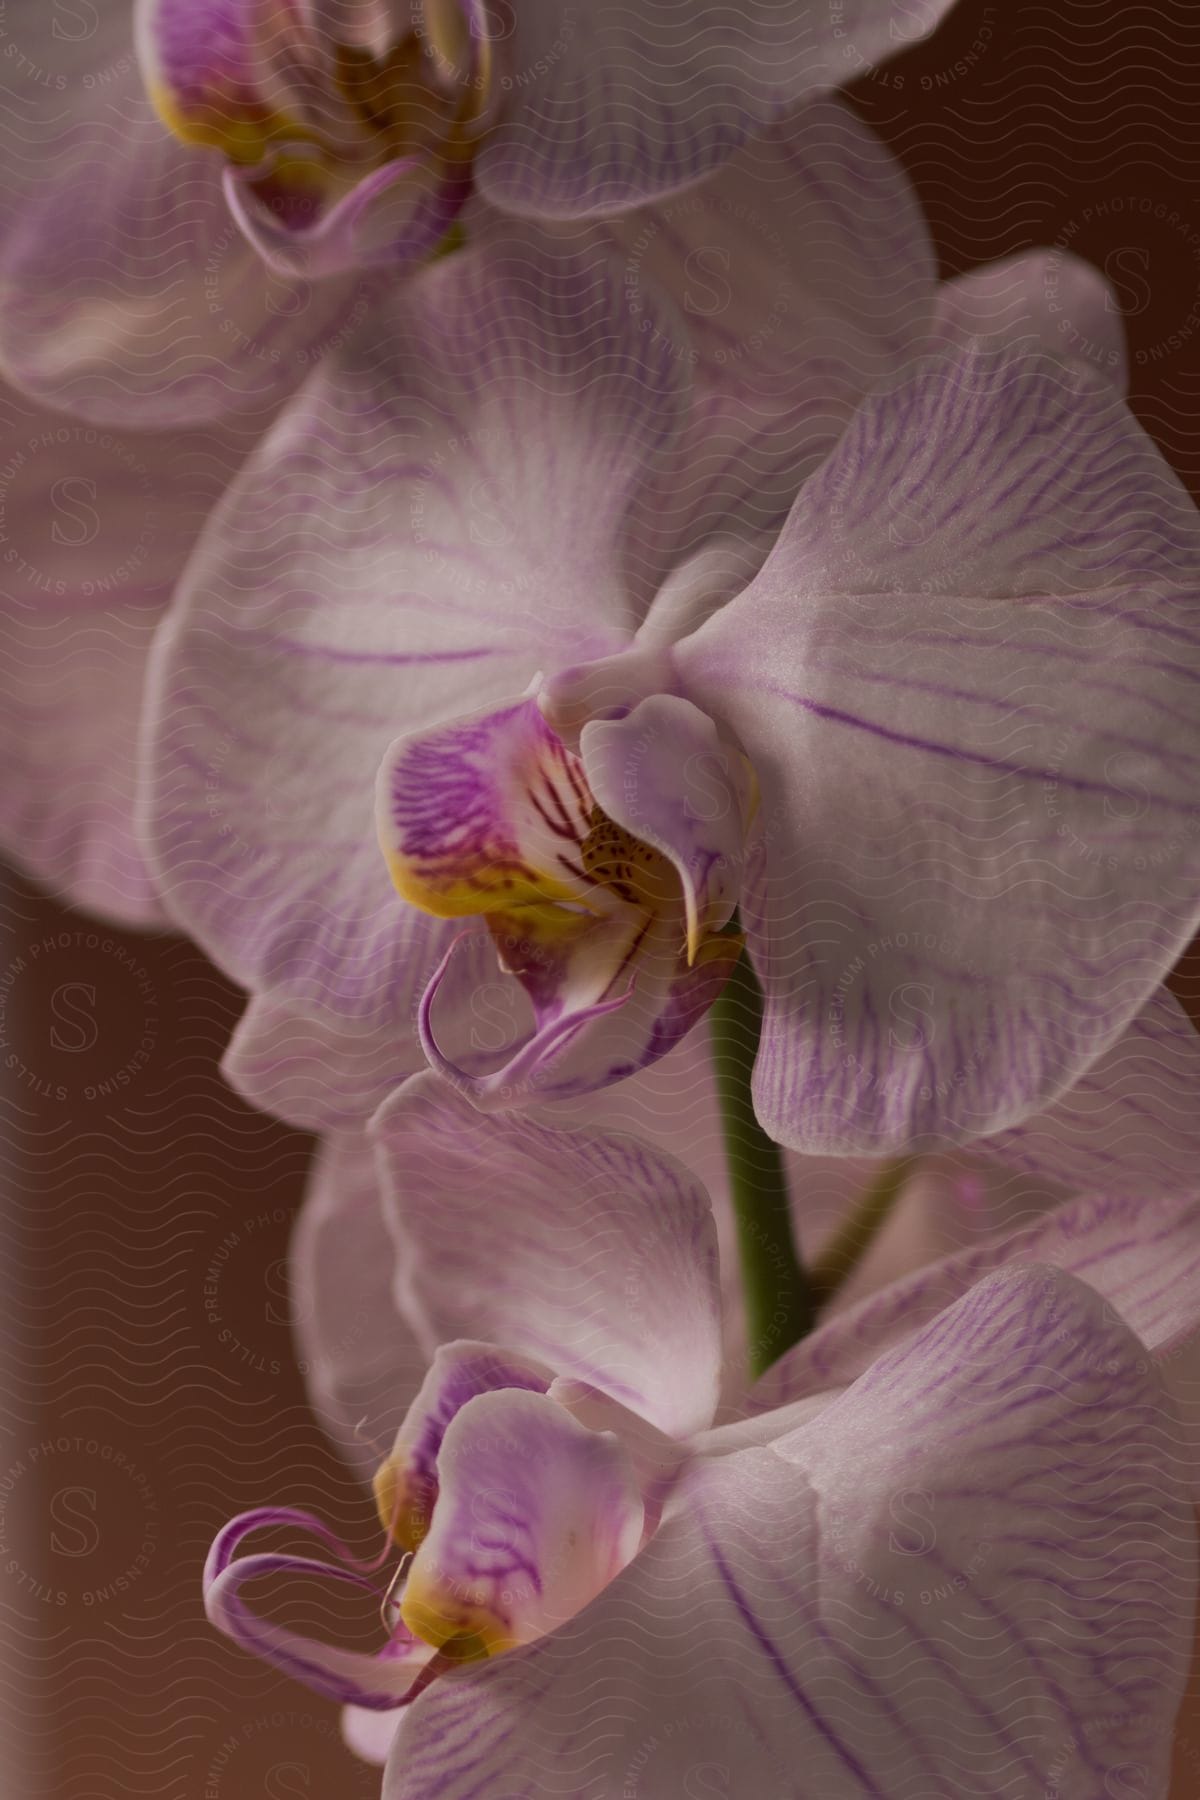 a close-up of a purple and white orchid flower with a yellow center.